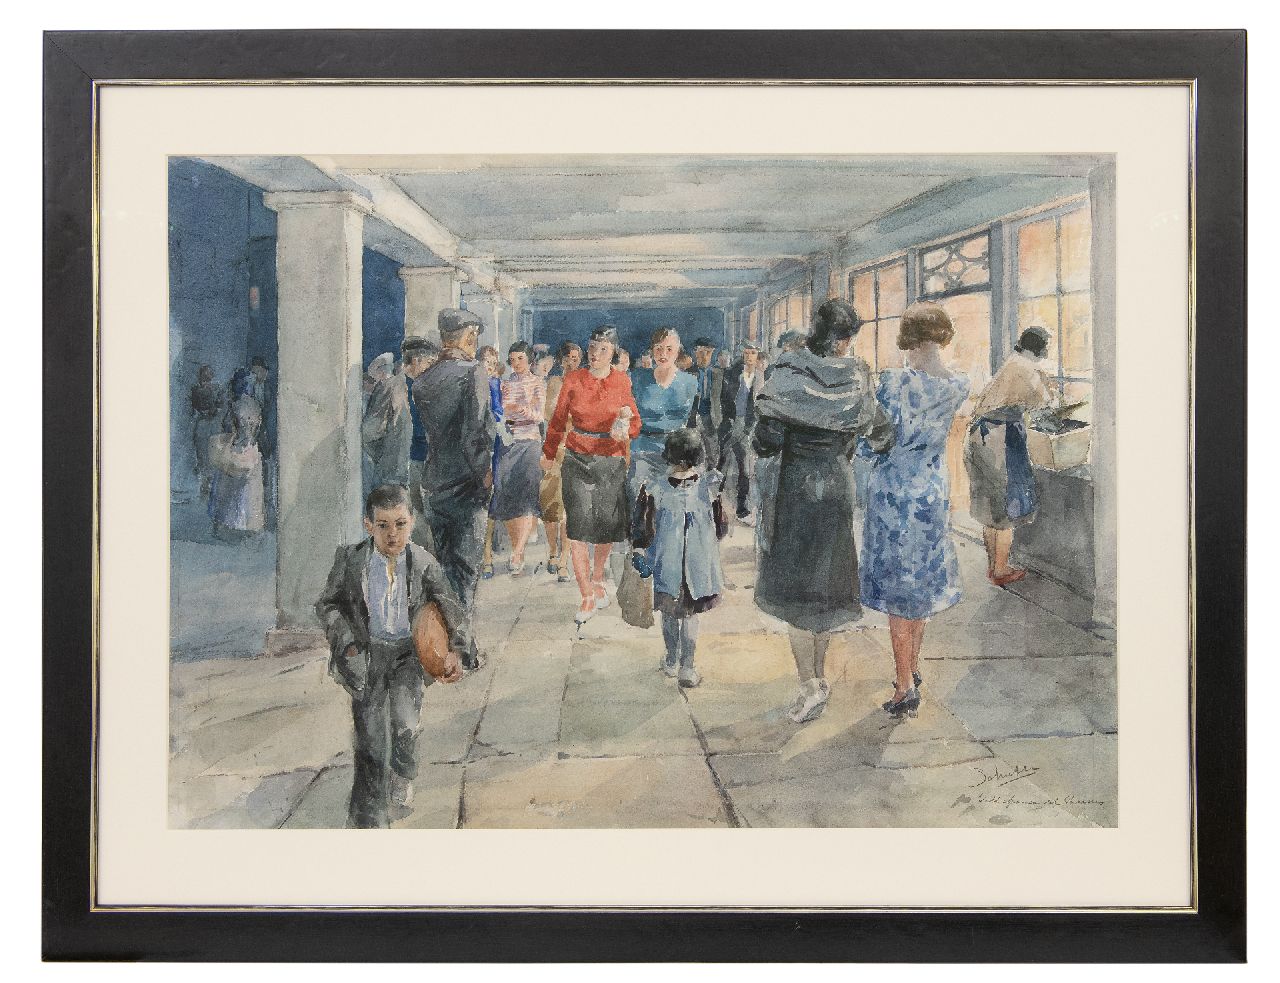 Schutte L.H.H.  | 'Louis' Hermanus Hendrikus Schutte | Watercolours and drawings offered for sale | A crowded street in Villafranca del Penedès, Spain, watercolour on paper 60.5 x 87.5 cm, signed l.r. and on the reverse